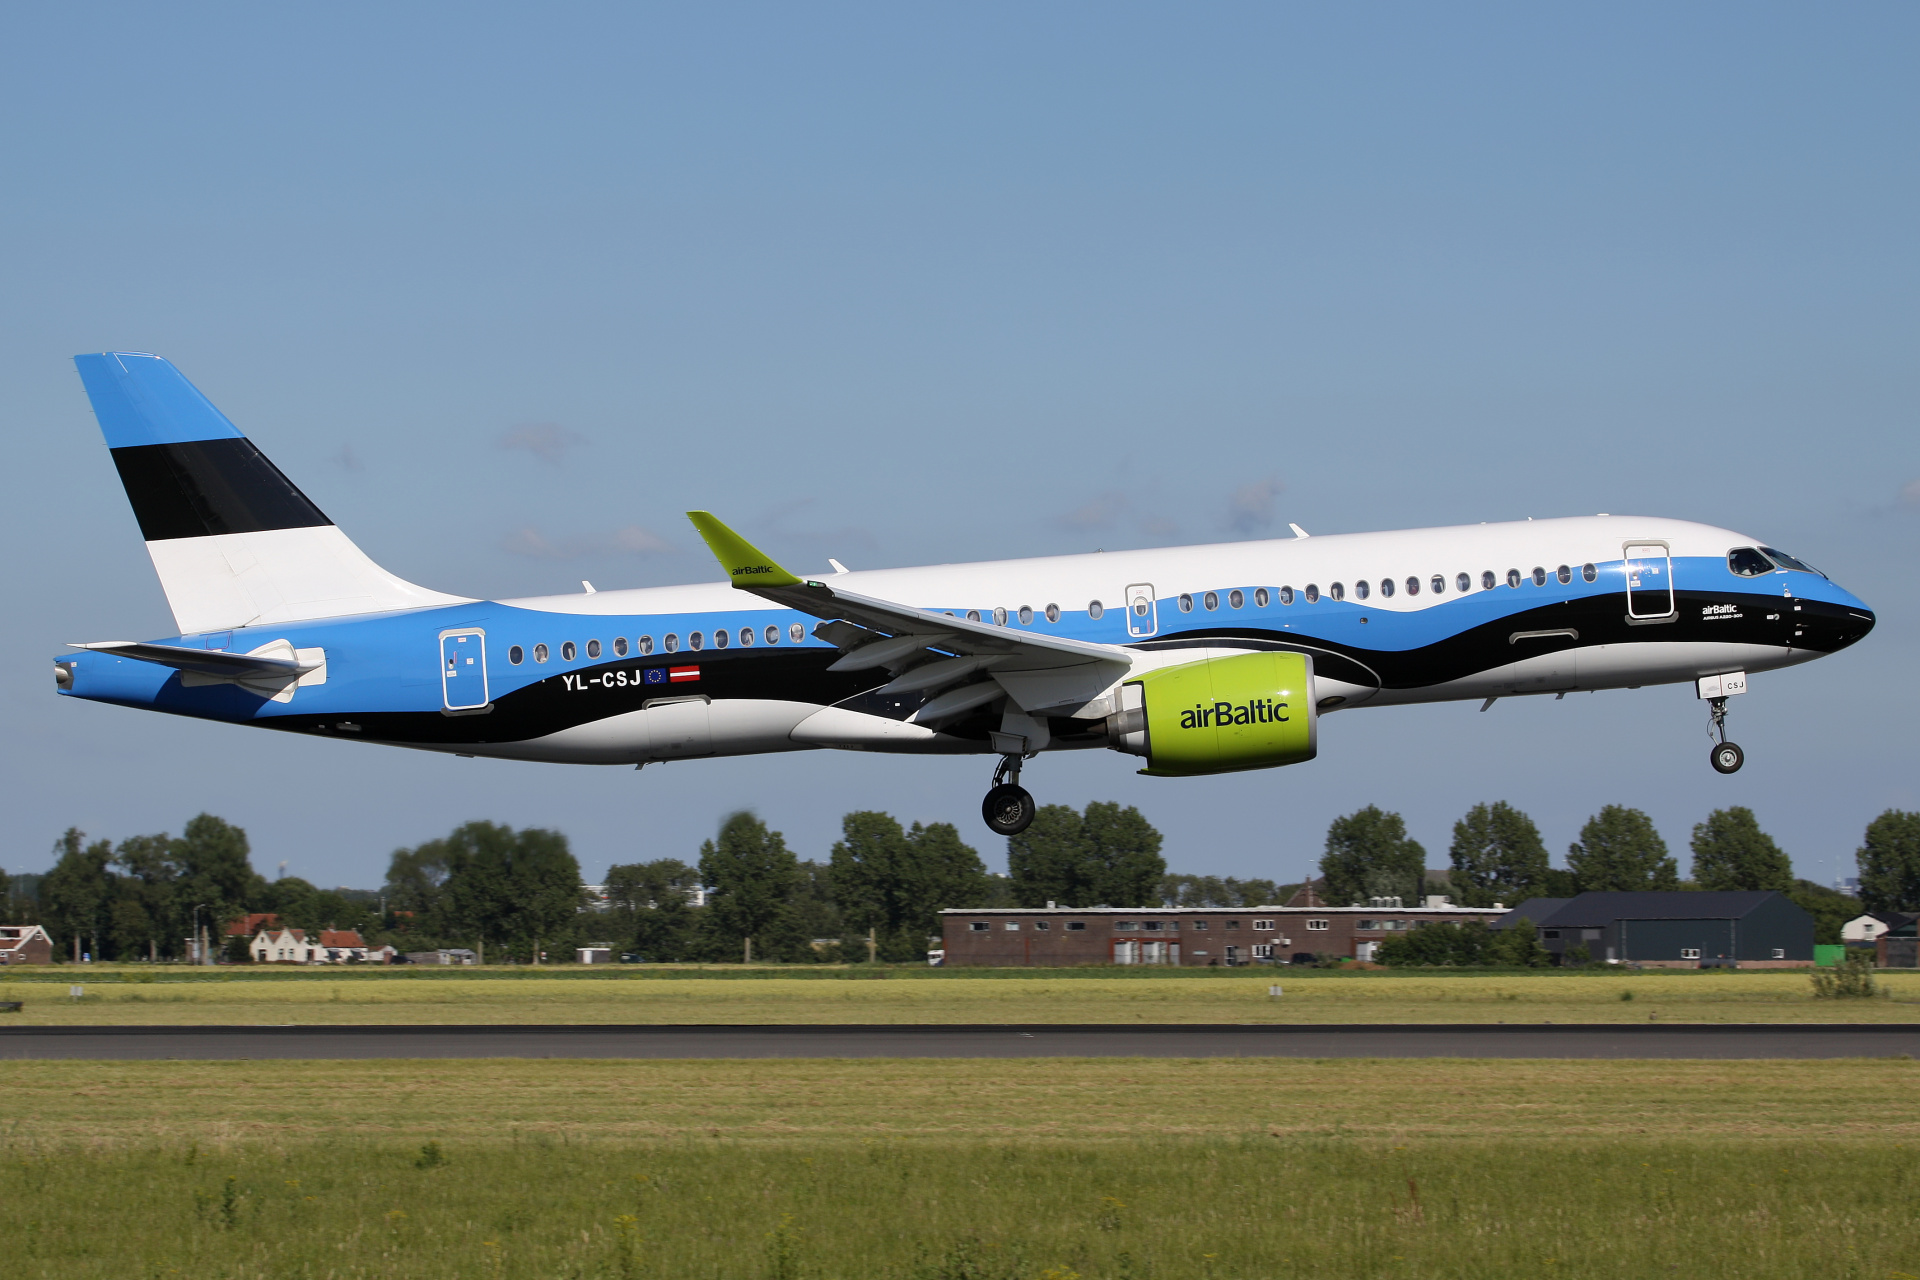 YL-CSJ, airBaltic (Estonian flag livery) (Aircraft » Schiphol Spotting » Airbus A220-300)